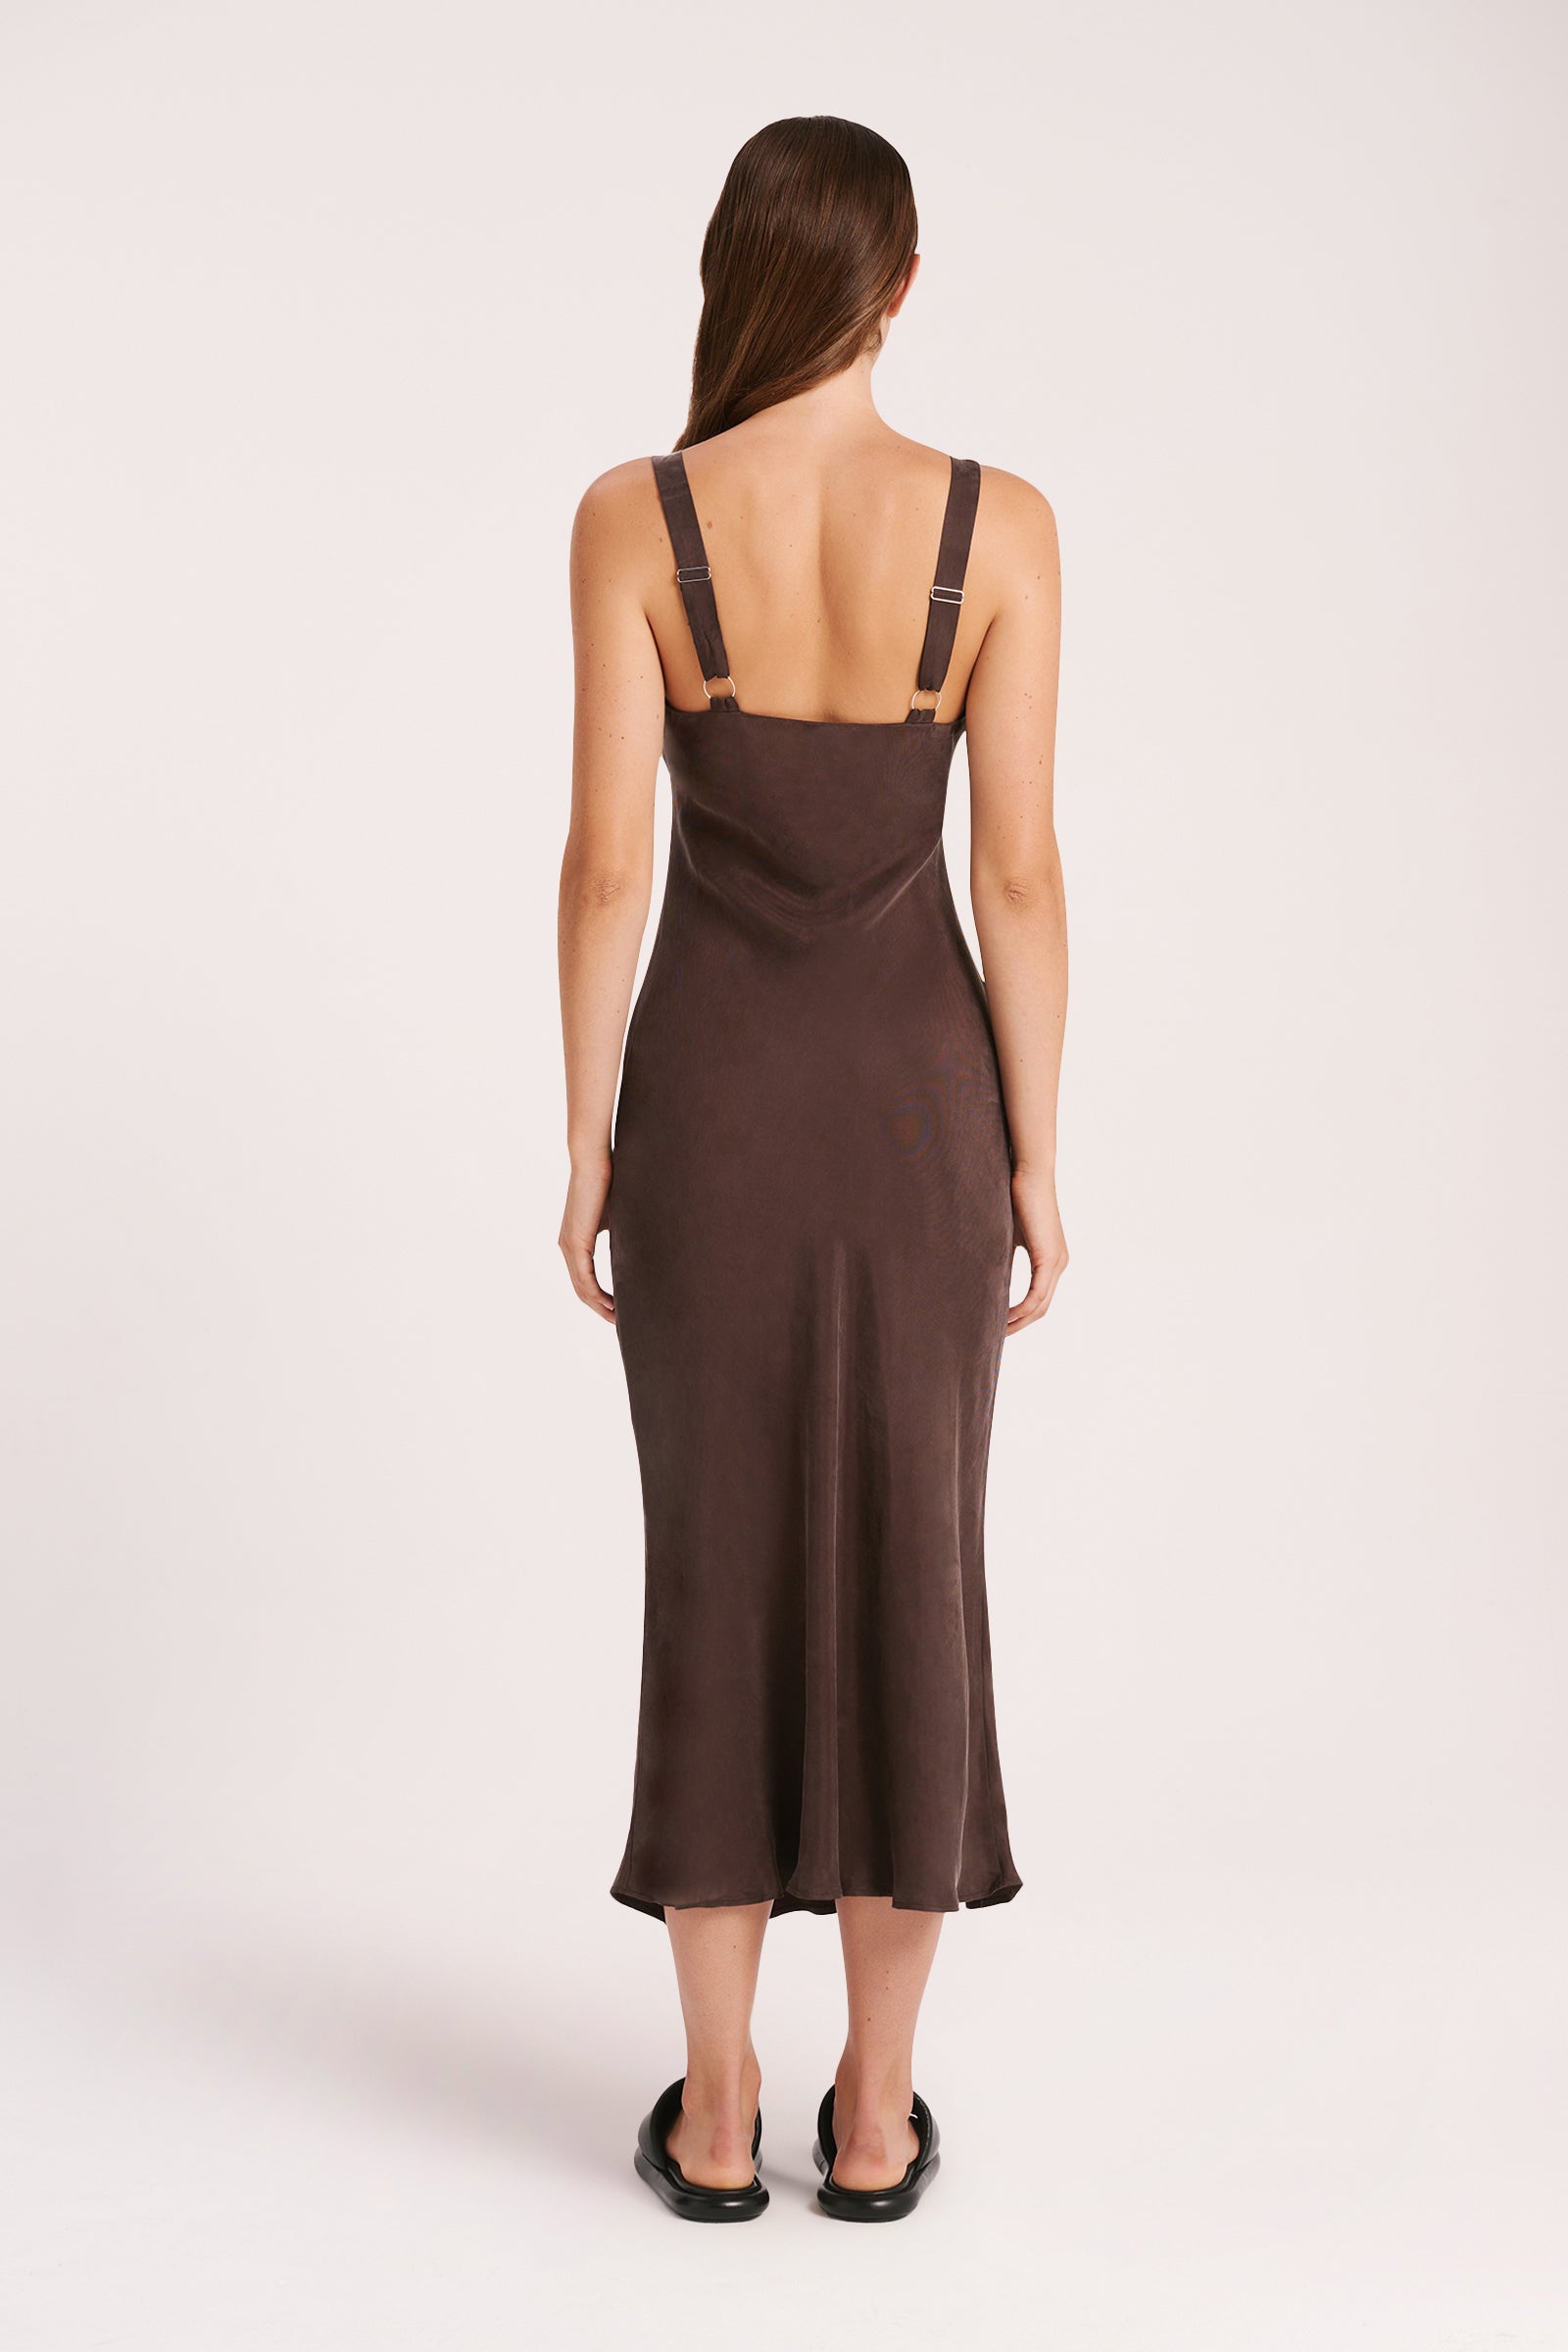 Nude Lucy Ren Cupro Slip Dress In A Brown Cinder Colour 